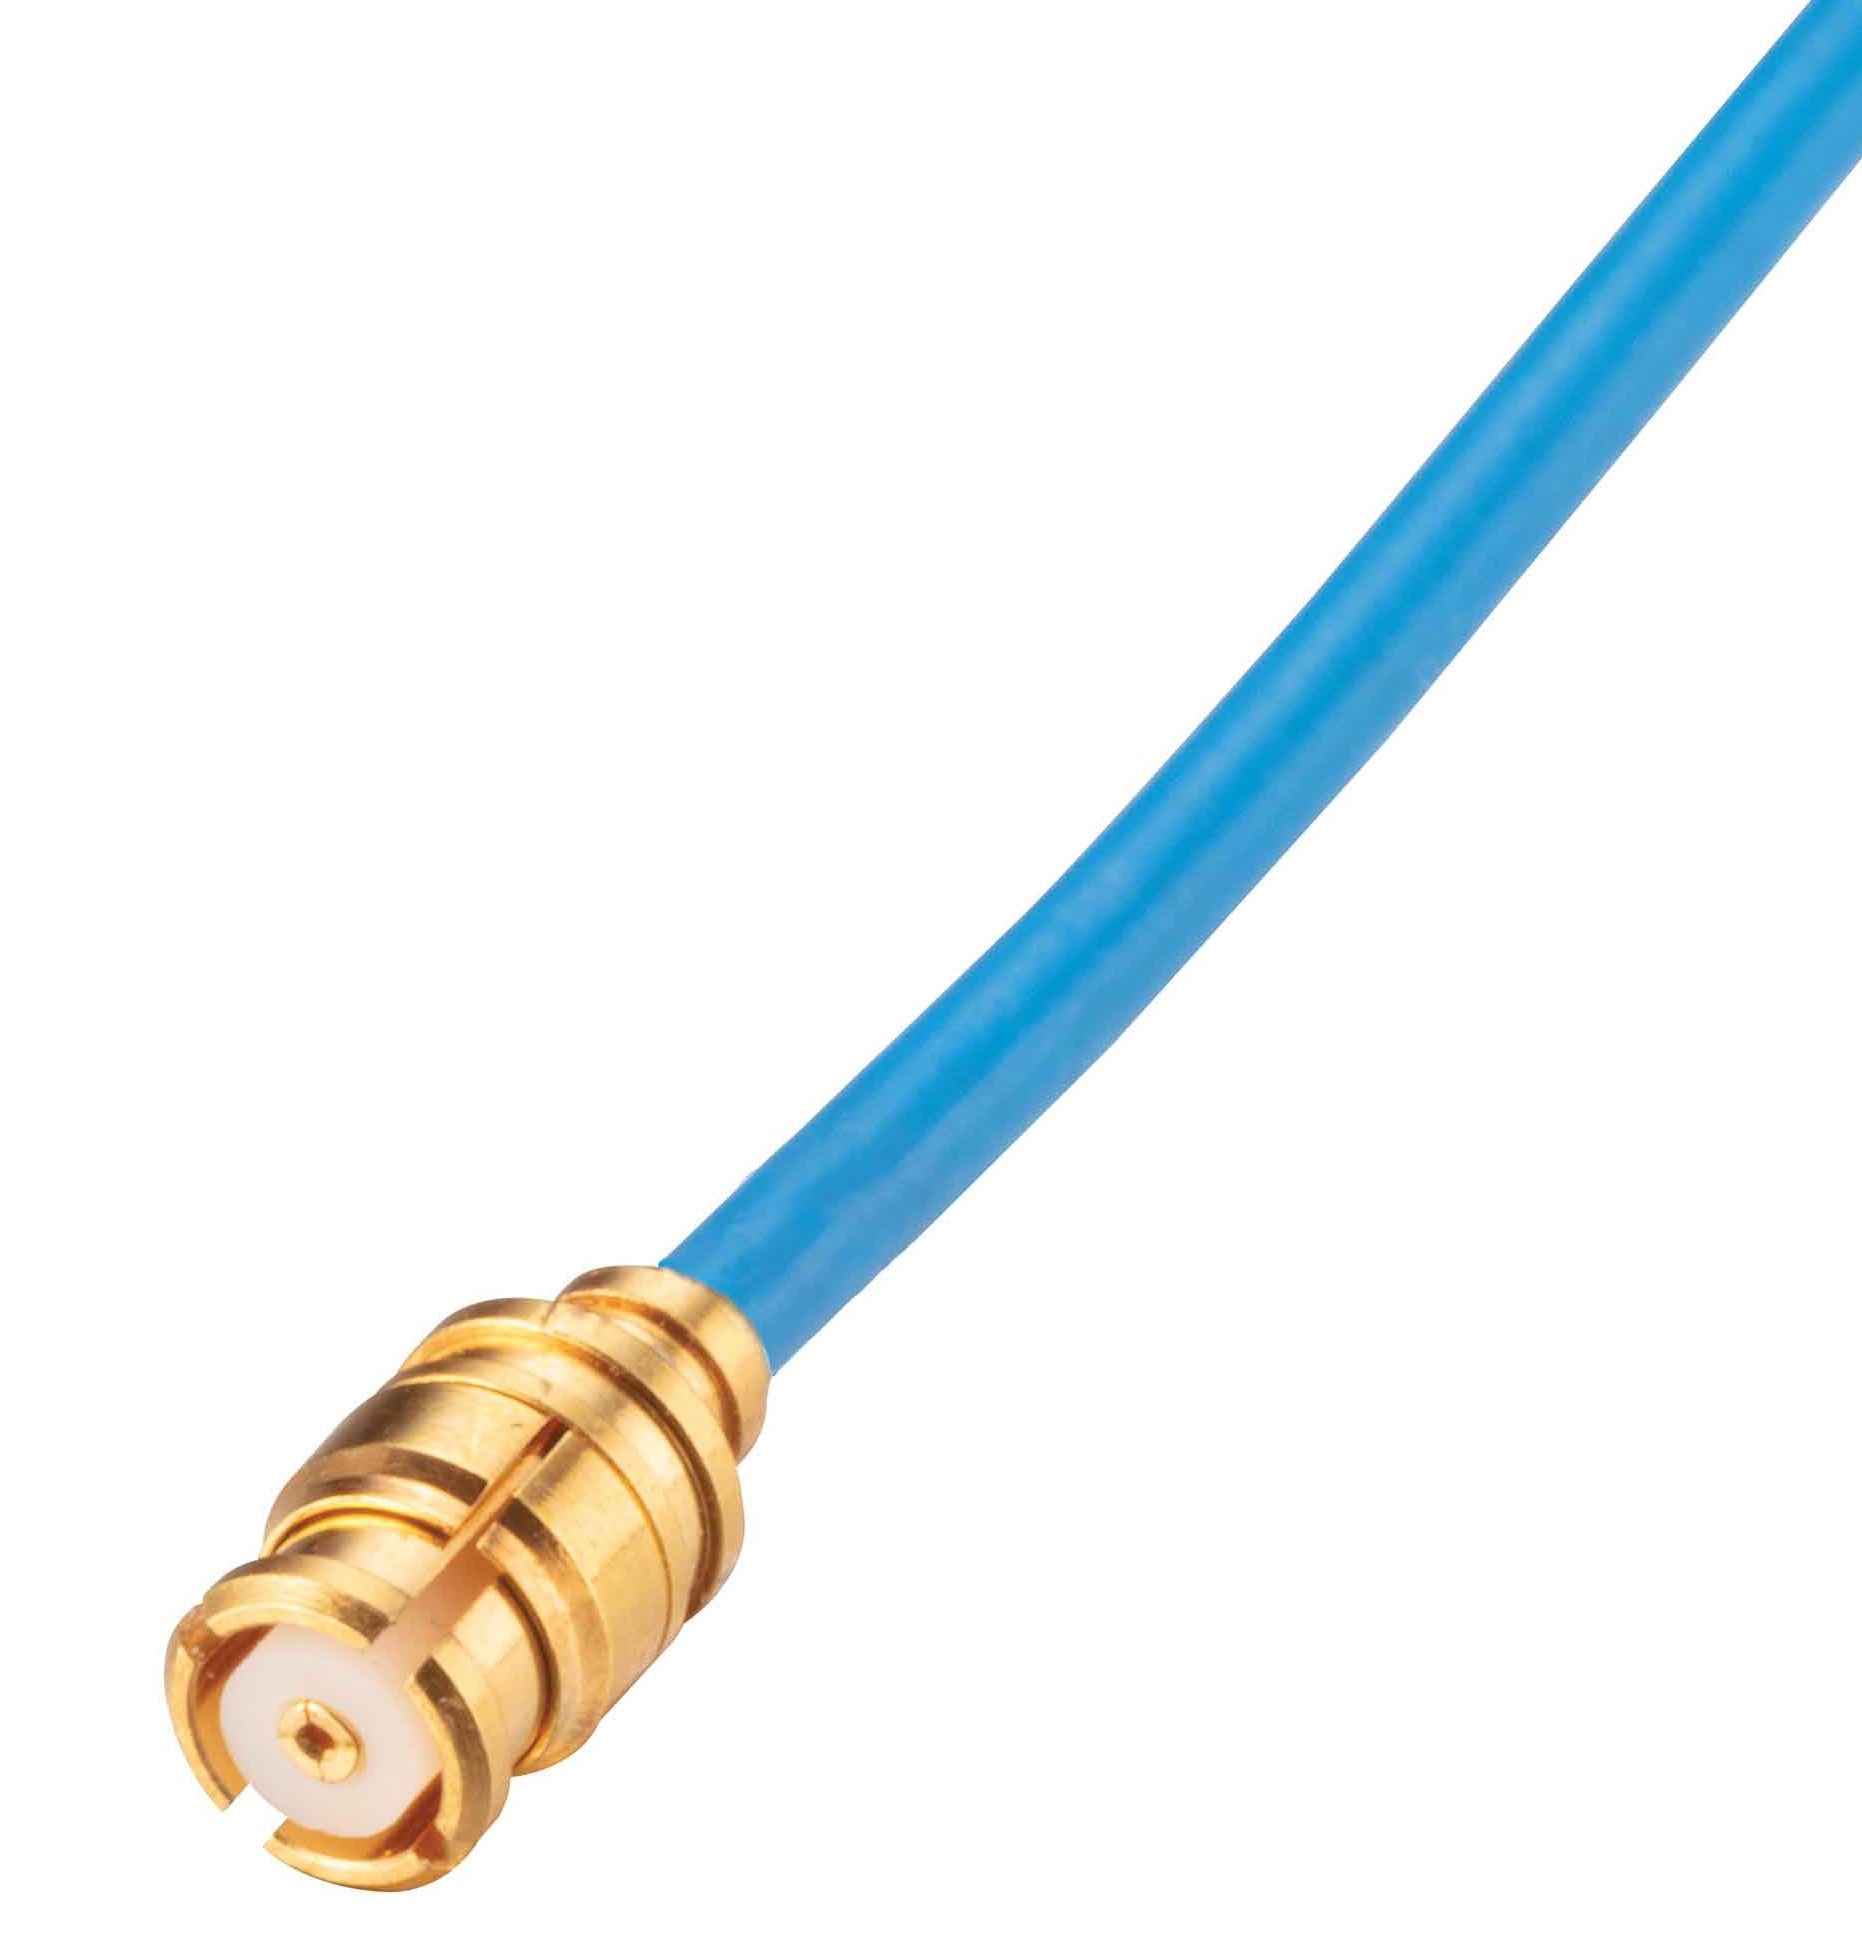 The versatile TF-047 micro-coaxial cable from Times Microwave Systems